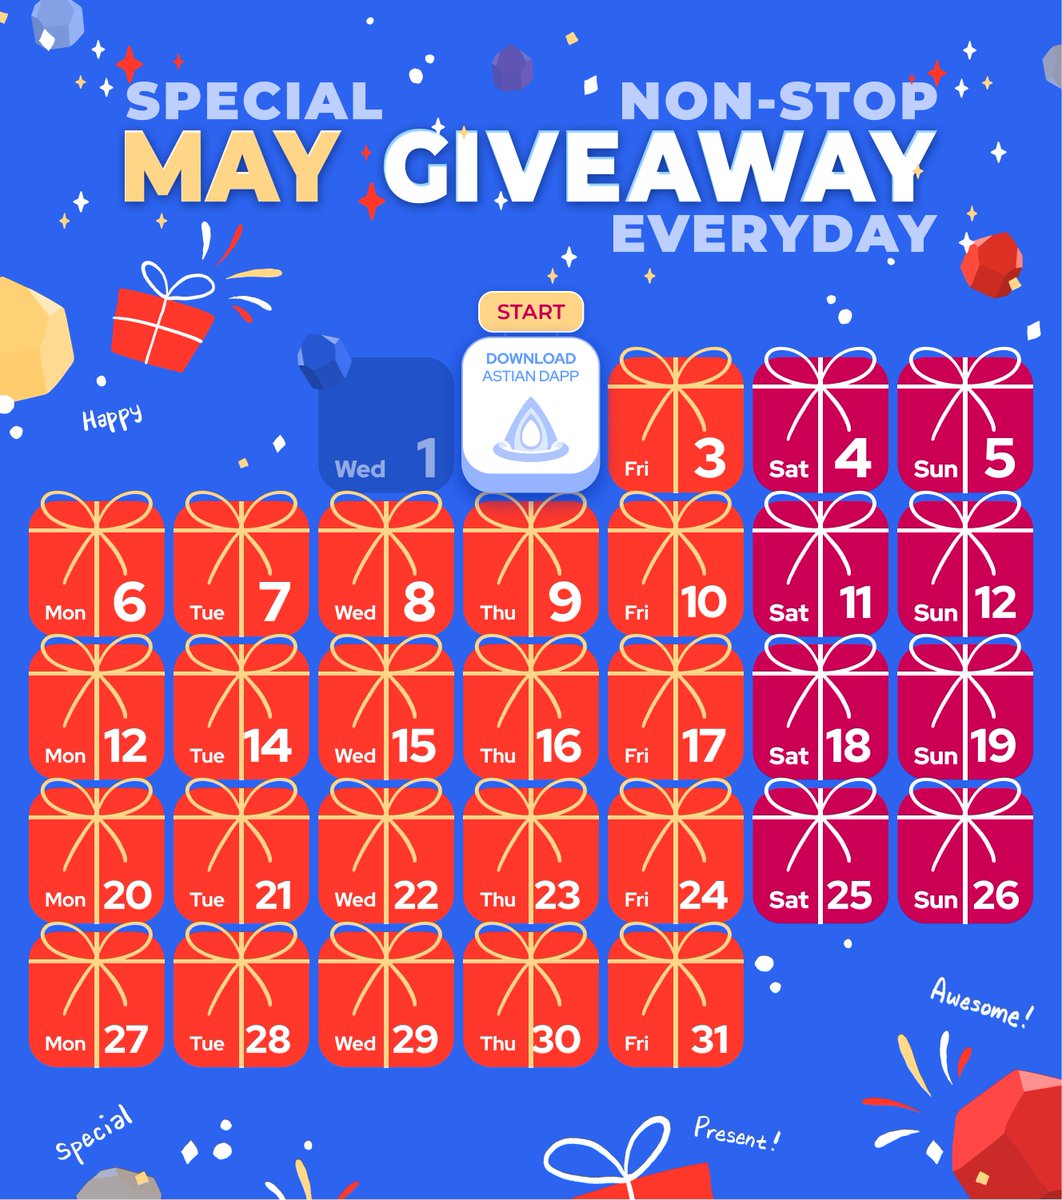 🎉Download Astian DApp!!!🎉

🔥🔥🔥Rewards : 50 MATIC(Random 50 winners)🔥🔥🔥
Winner Announce : May 6

Task 1: Download the Astian DApp!
Task 2: Write a review
Task 3: Submit your review in comment
Task 4: ❤️& RT and Follow @CeluvPlay 

#giveaway #MATIC #Astian #event